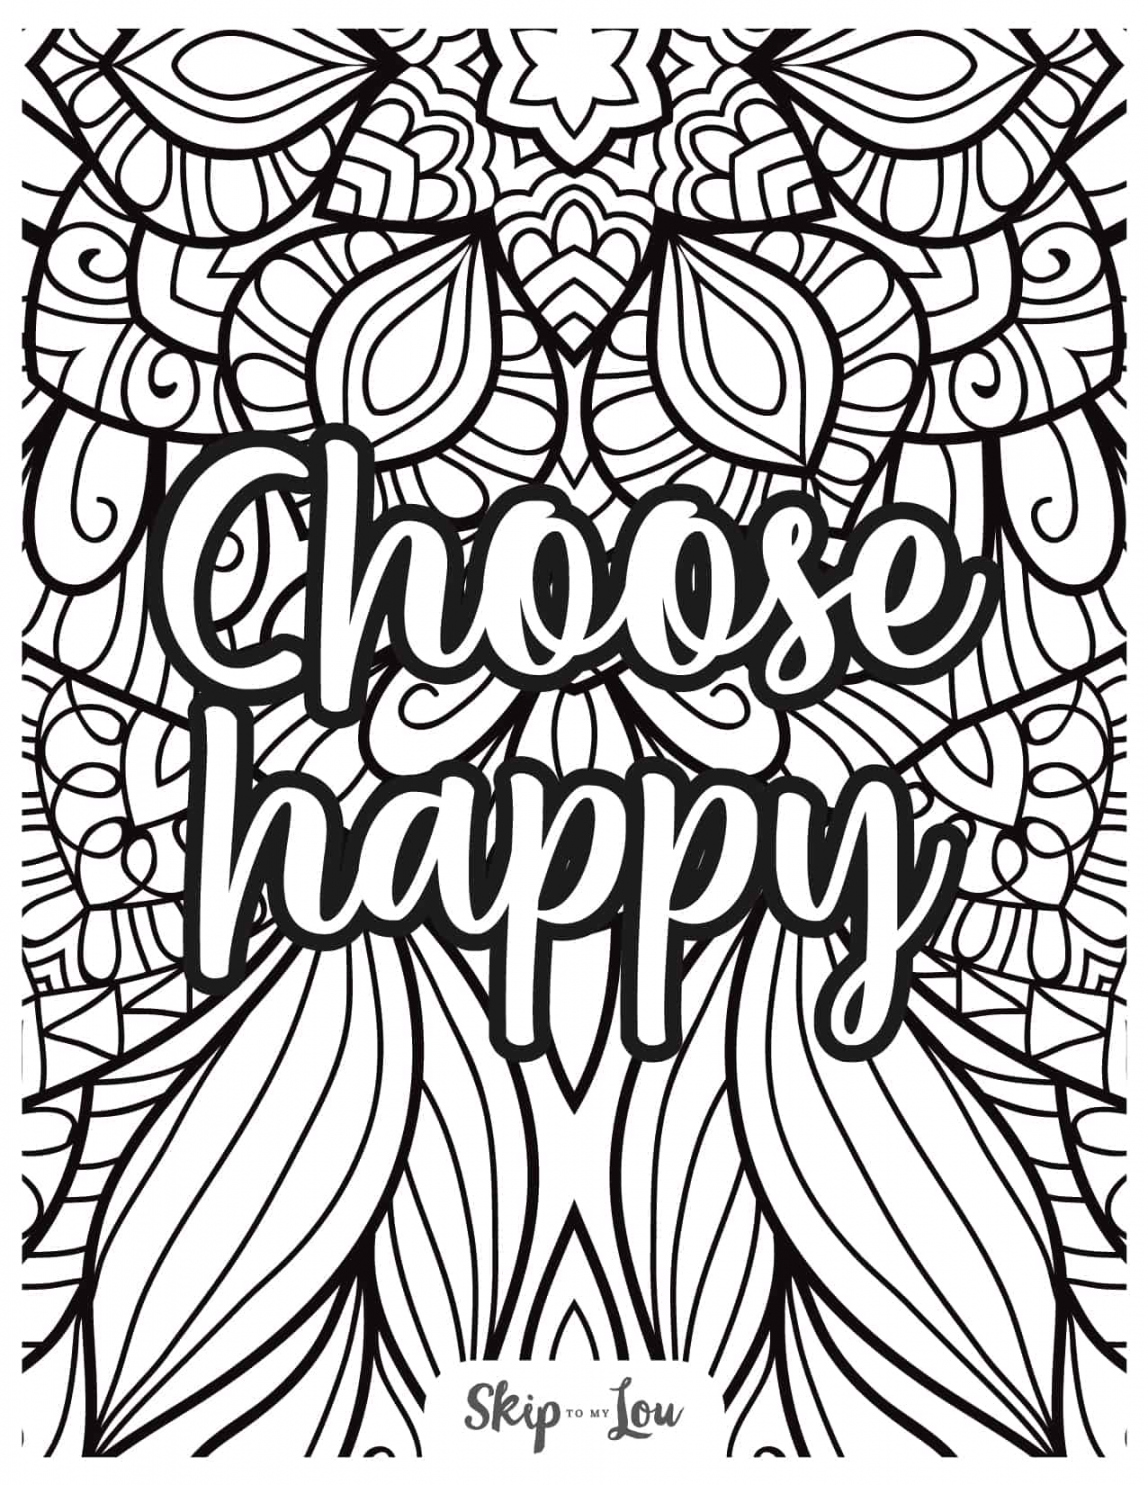 Free Coloring Pages For Adults  Skip To My Lou - FREE Printables - Free Printable Coloring Pages For Adults Only Quotes